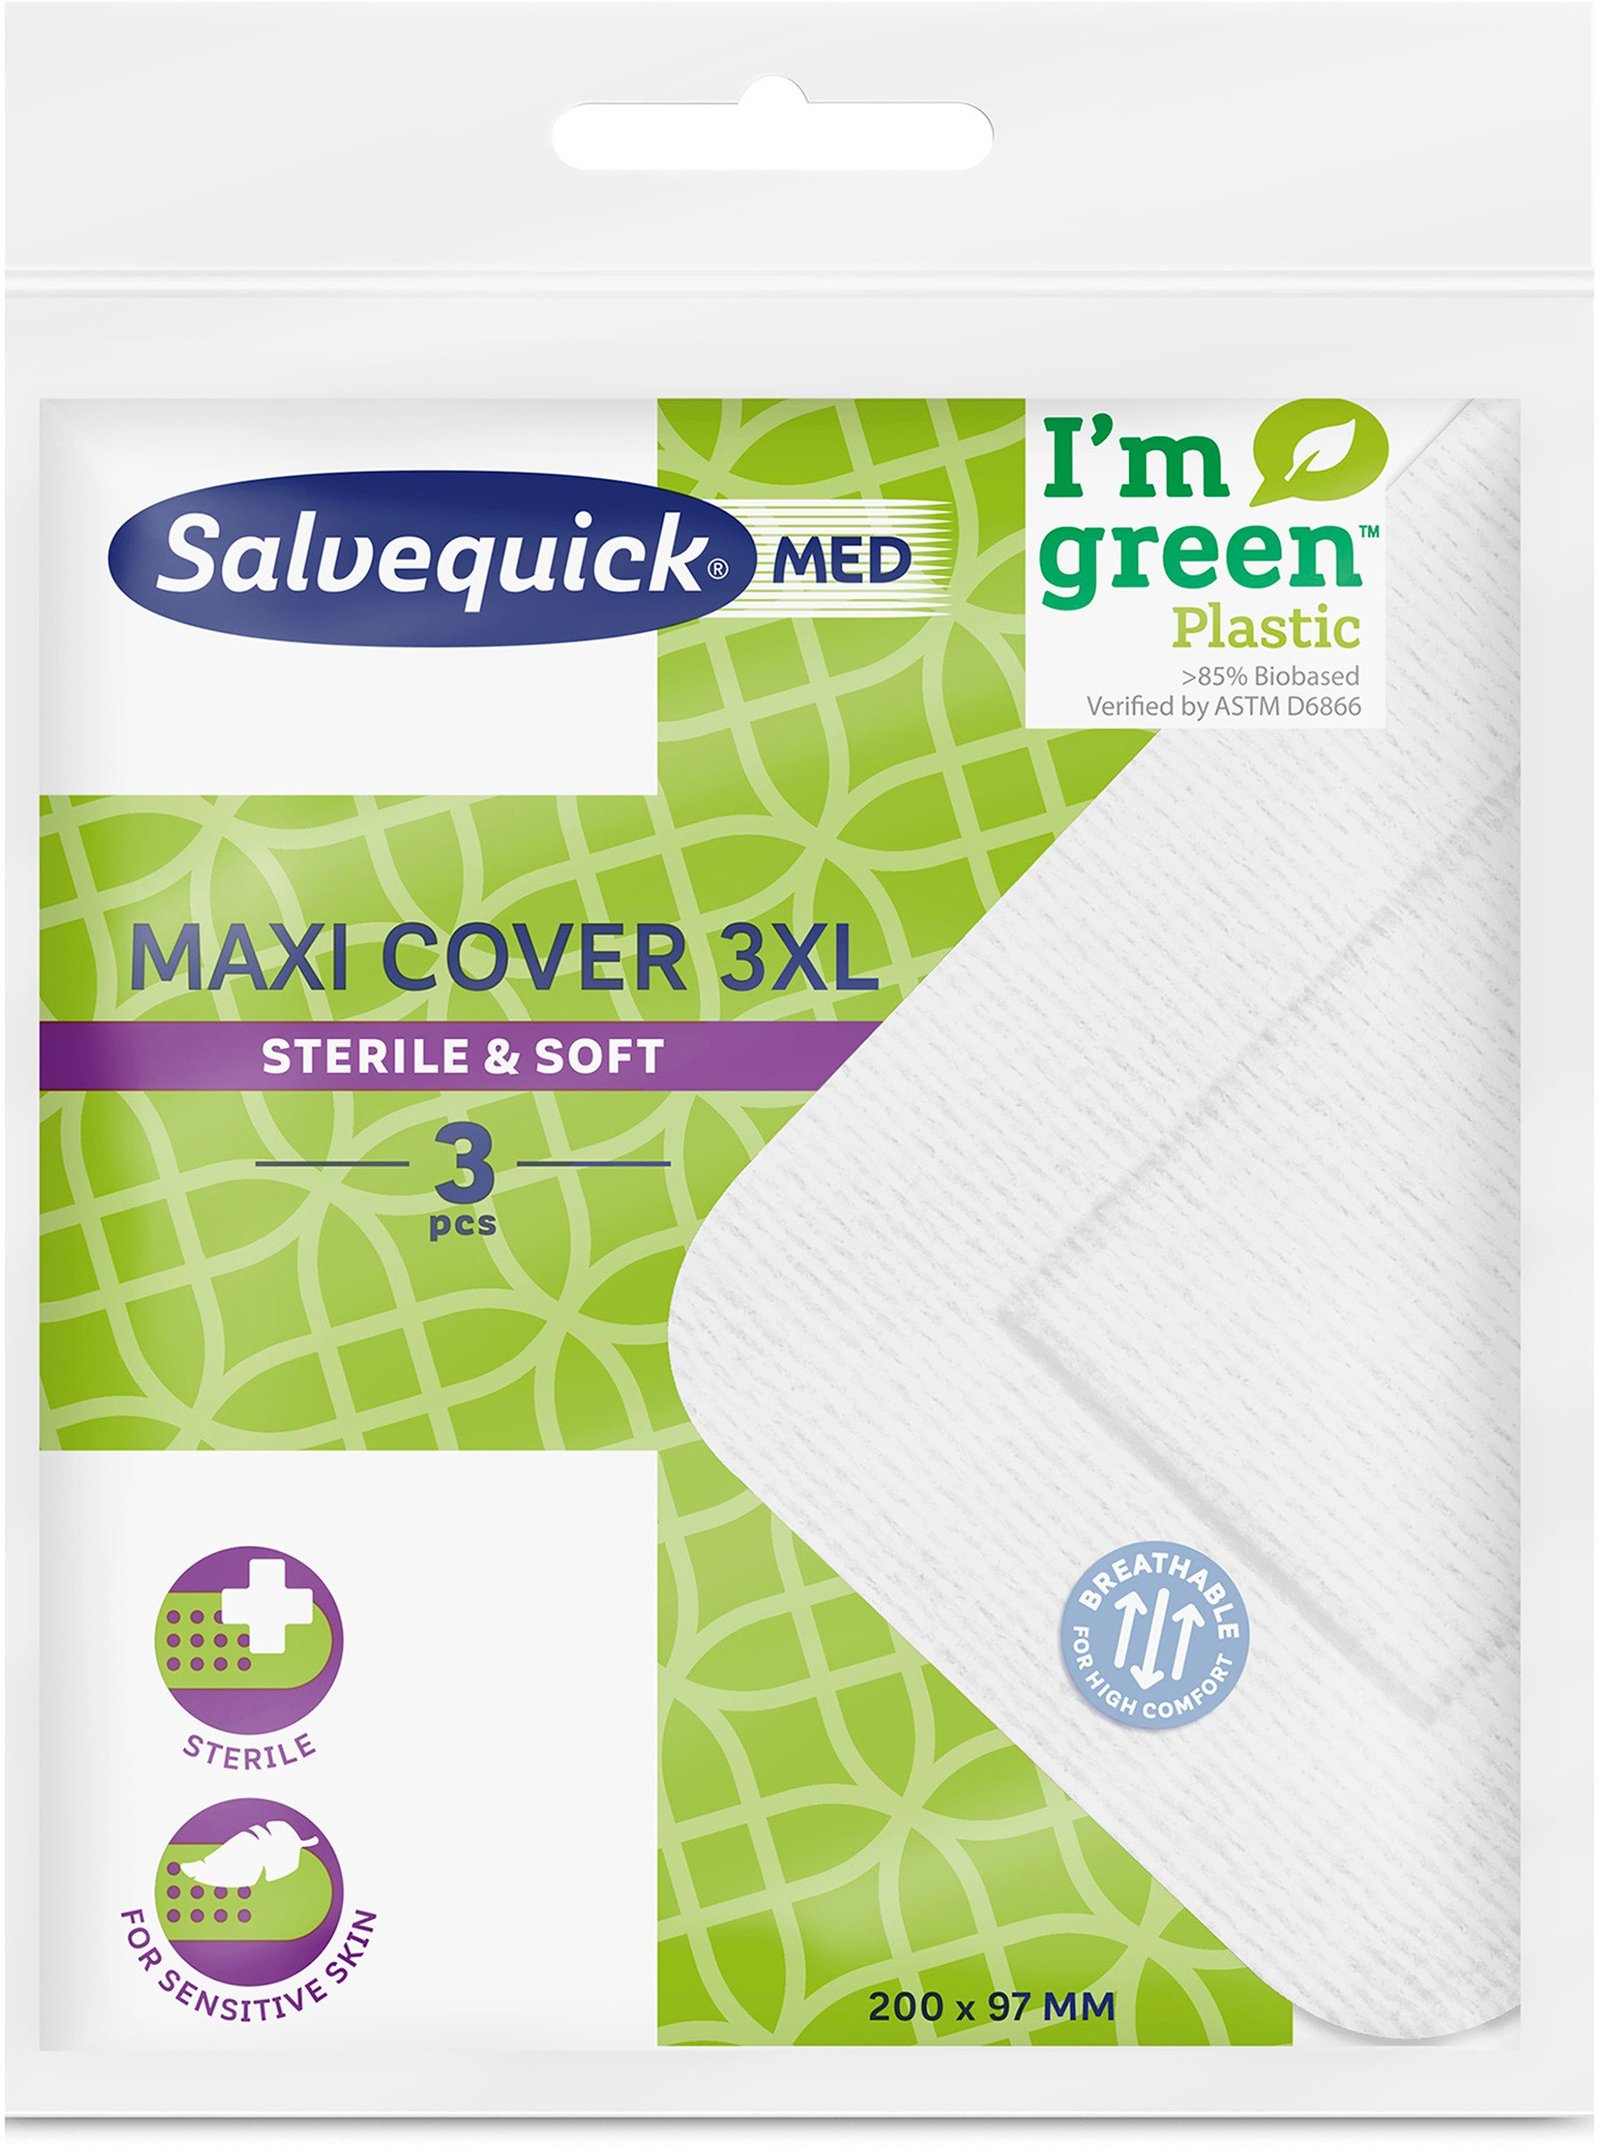 Salvequick Med Maxi Cover 3XL 3 st